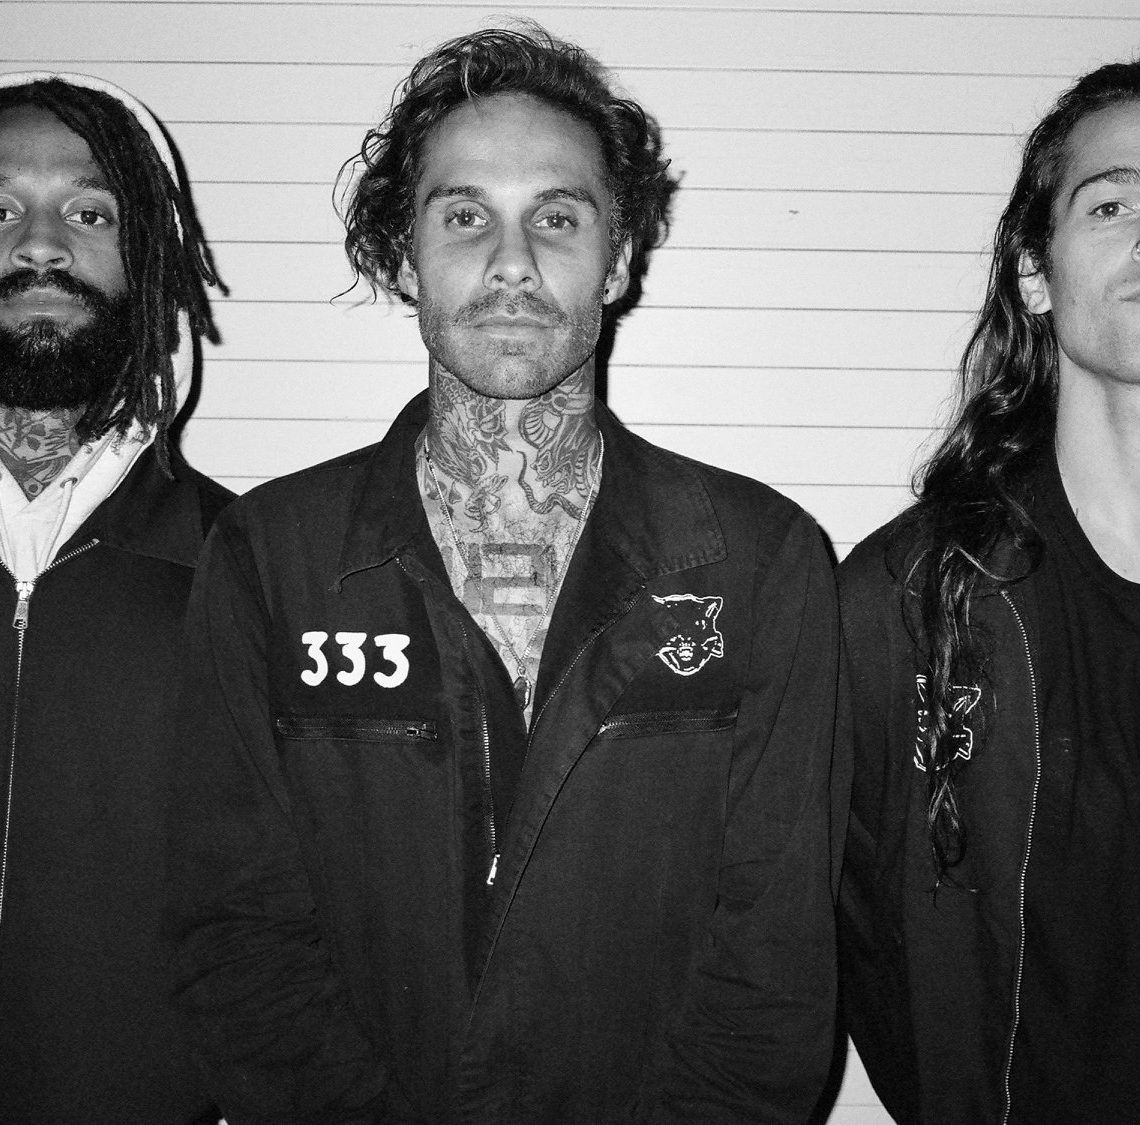 FEVER 333 share new song “Kingdom”